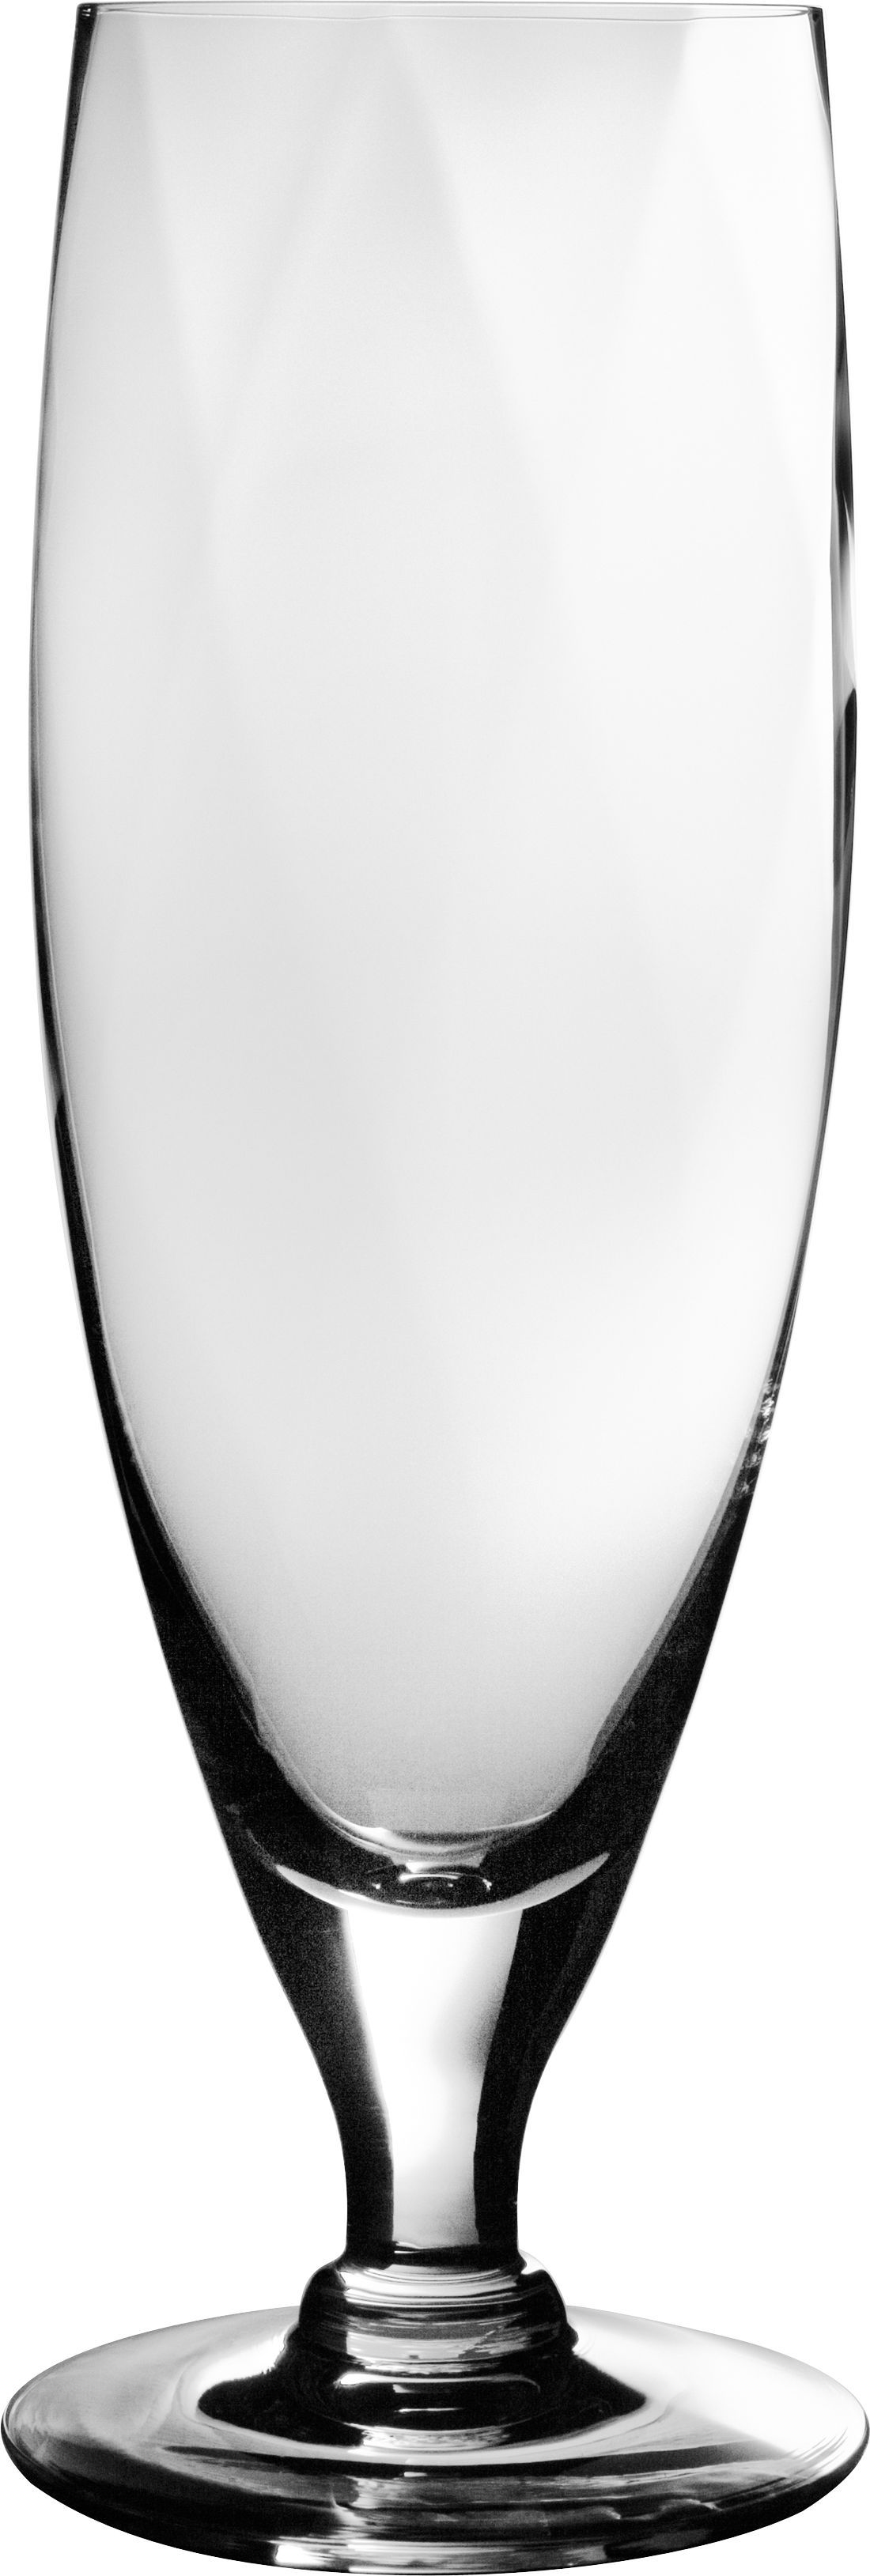 Empty Wine Glass Png Image - Glass, Transparent background PNG HD thumbnail